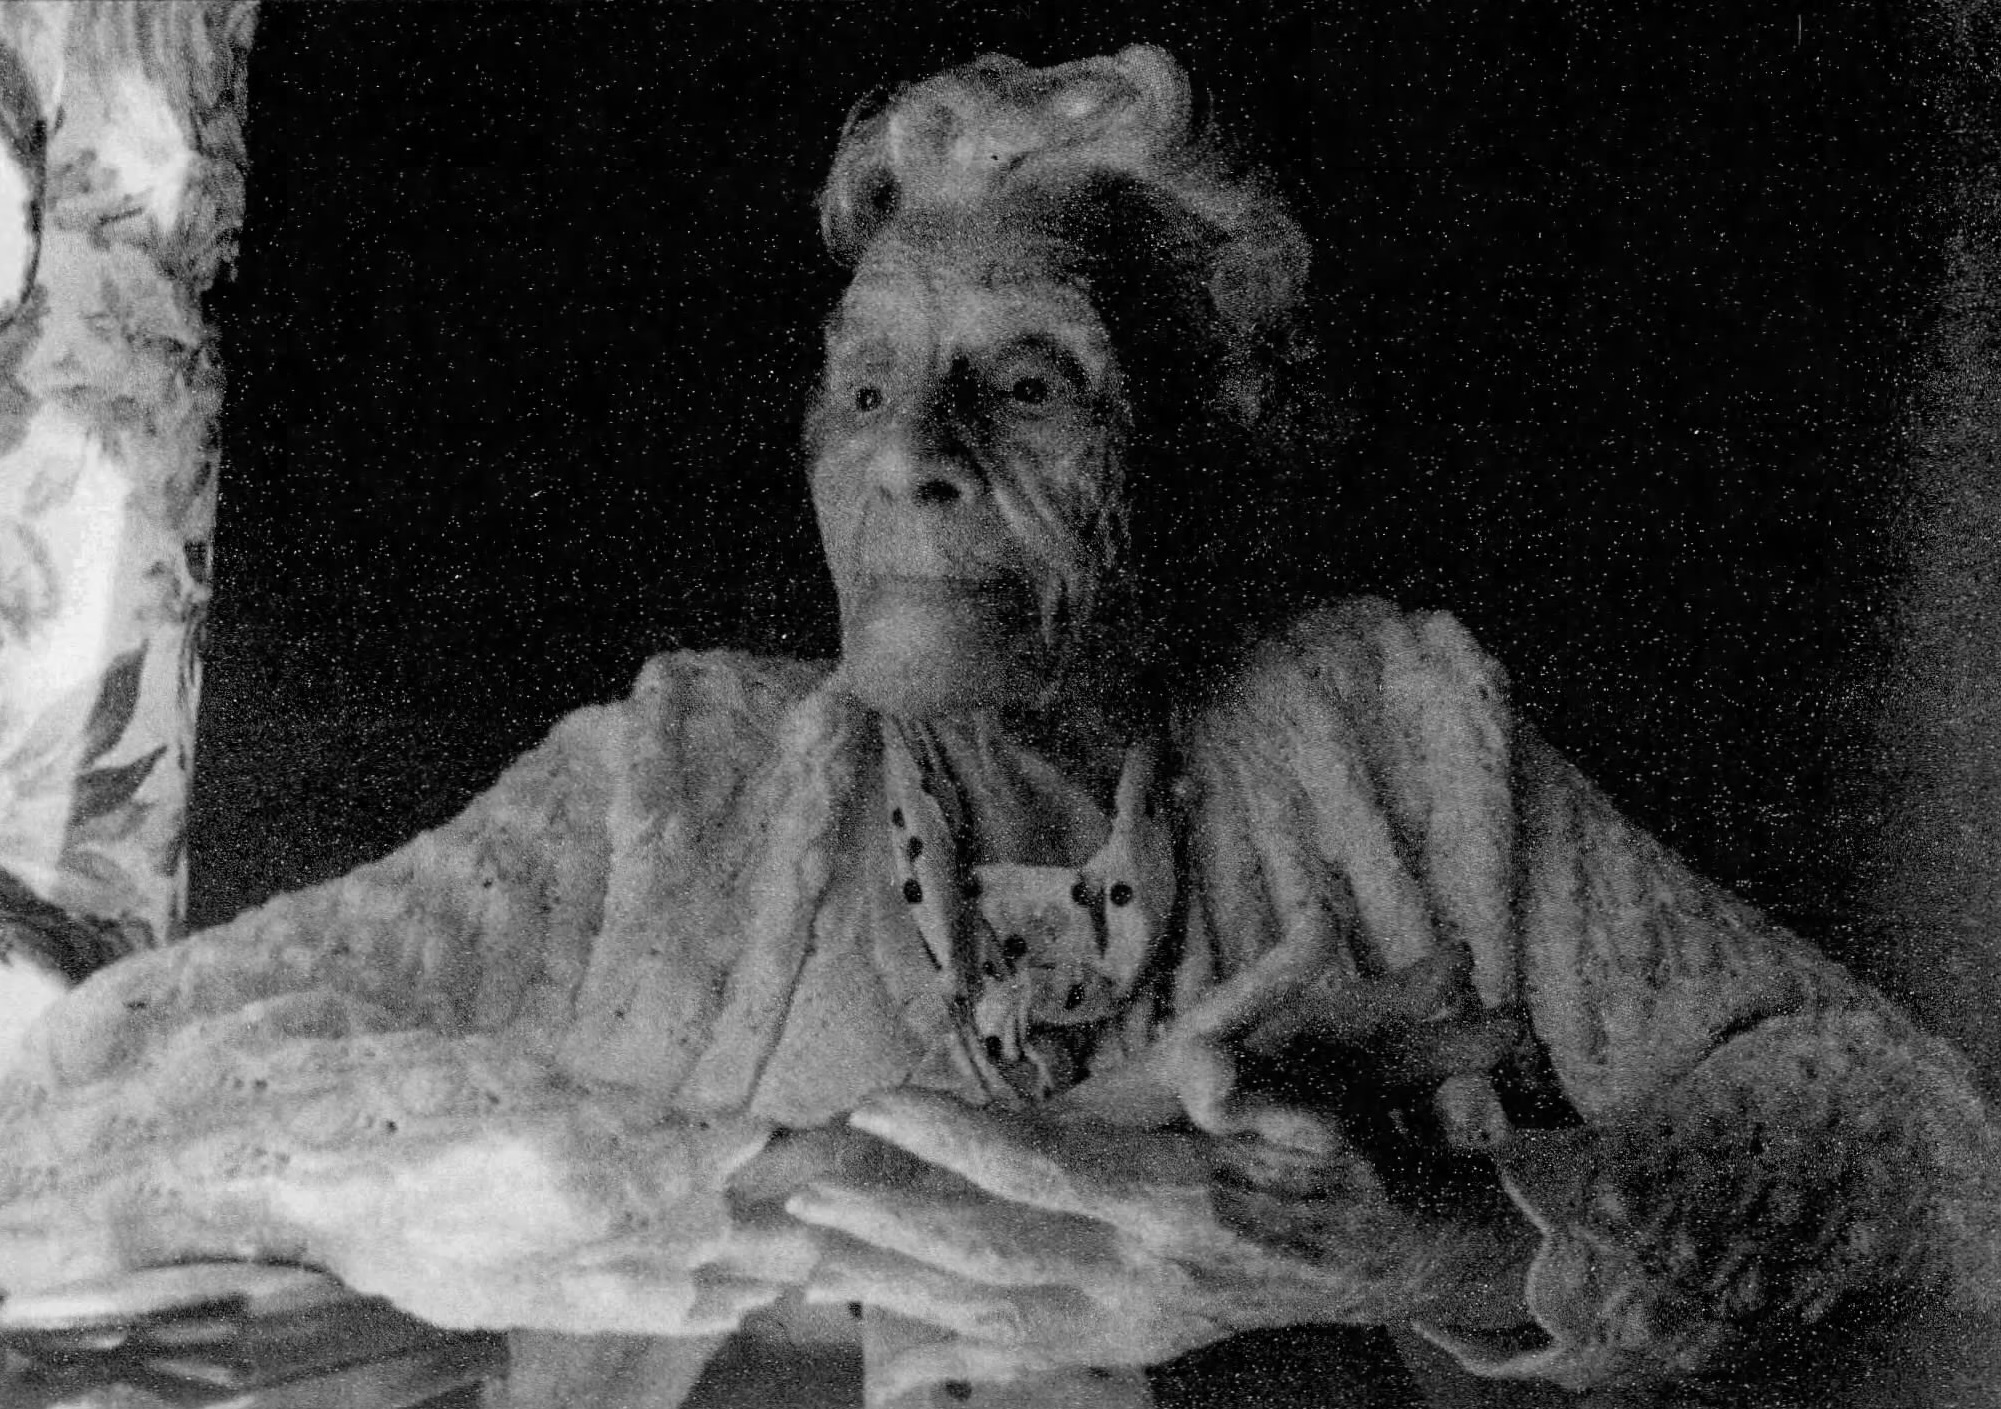 On her 112th birthday in 1999. (Source: The Tampa Tribune)